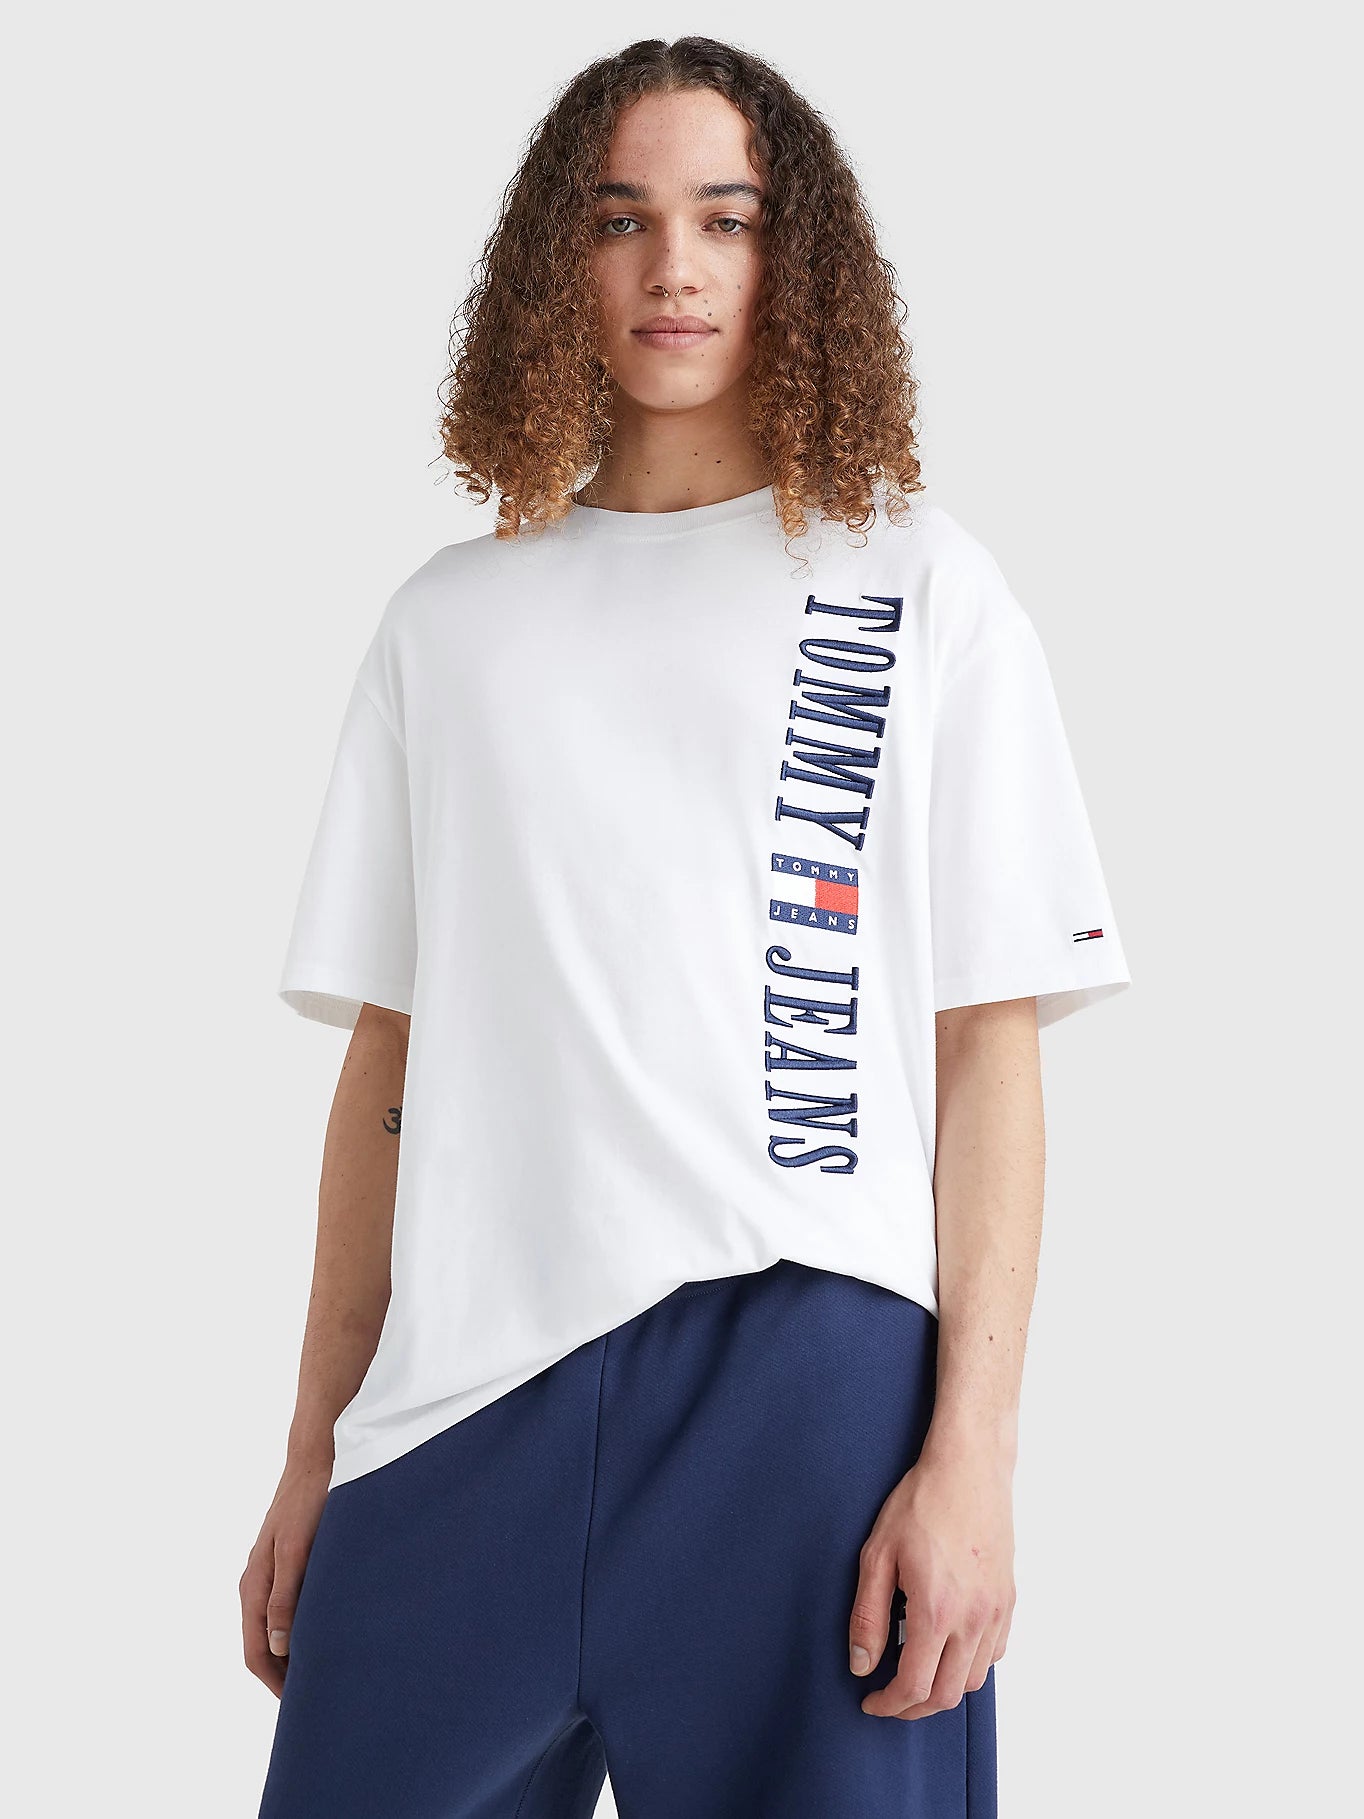 T-Shirt logo vertical Tommy Jeans blanc I Georgespaul